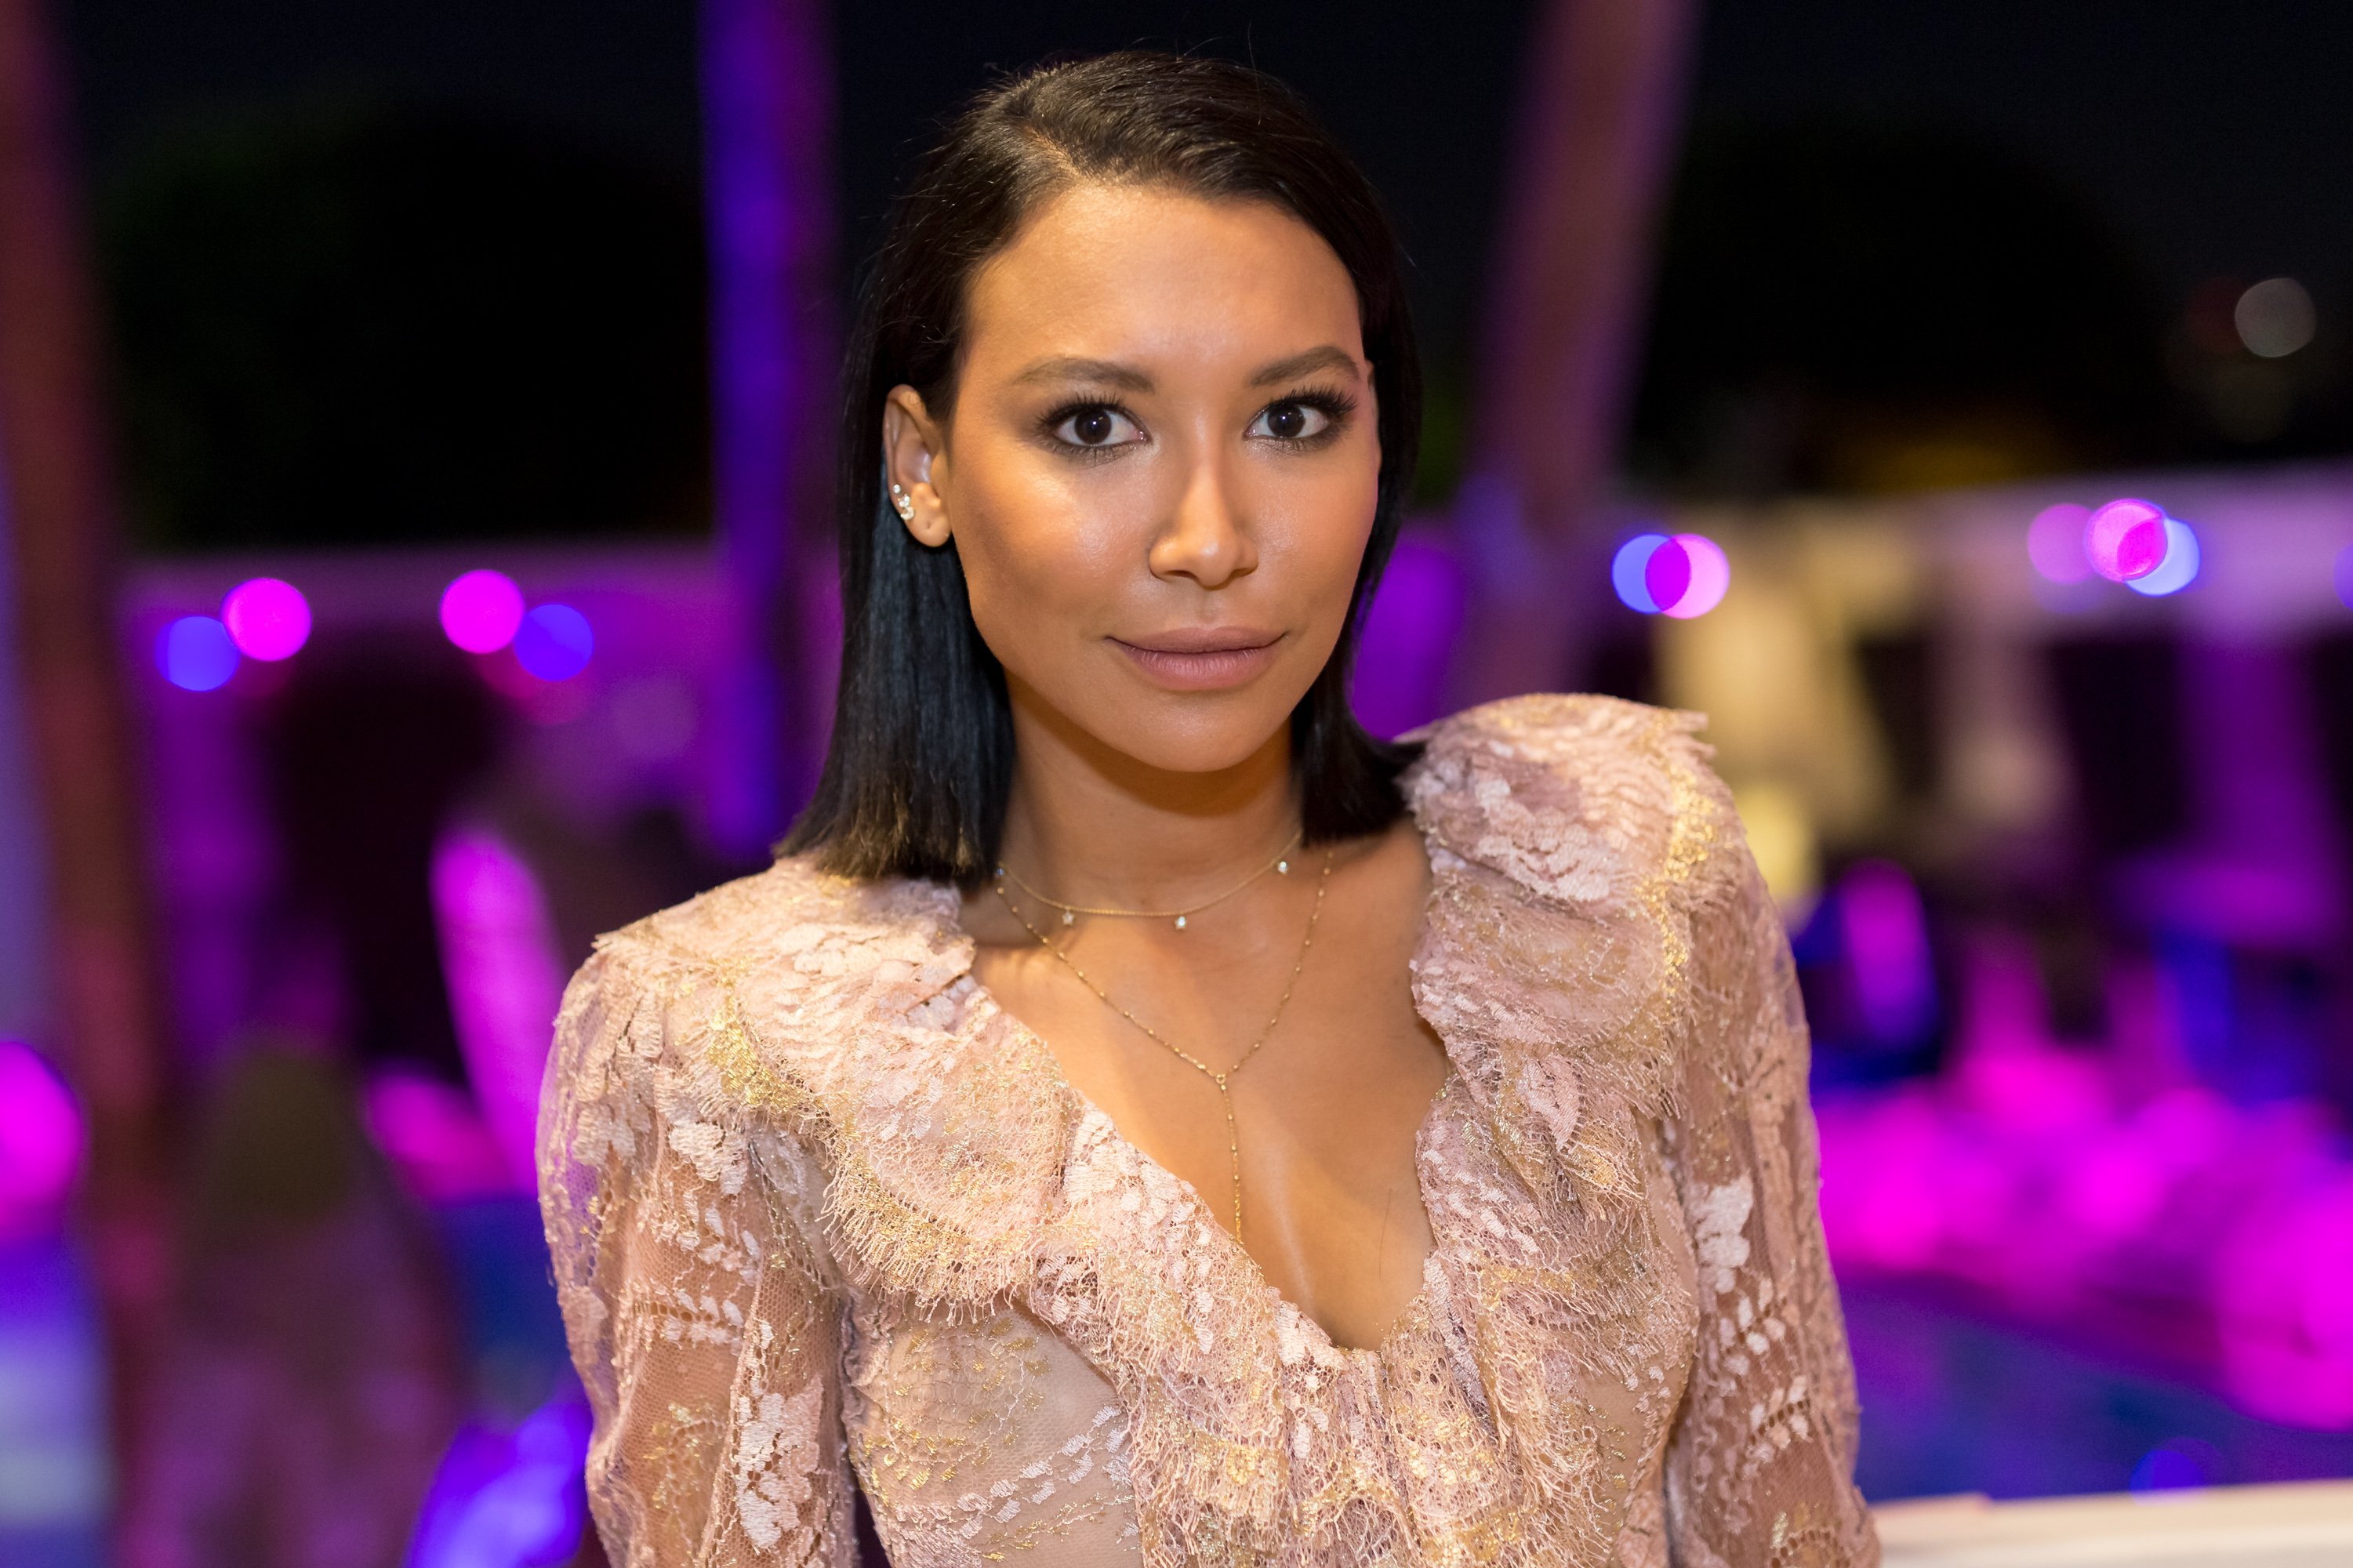 Naya Rivera poses during the Point Honors Los Angeles at The Beverly Hilton Hotel on October 7, 2017 in Beverly Hills, California. | Source: Getty Images